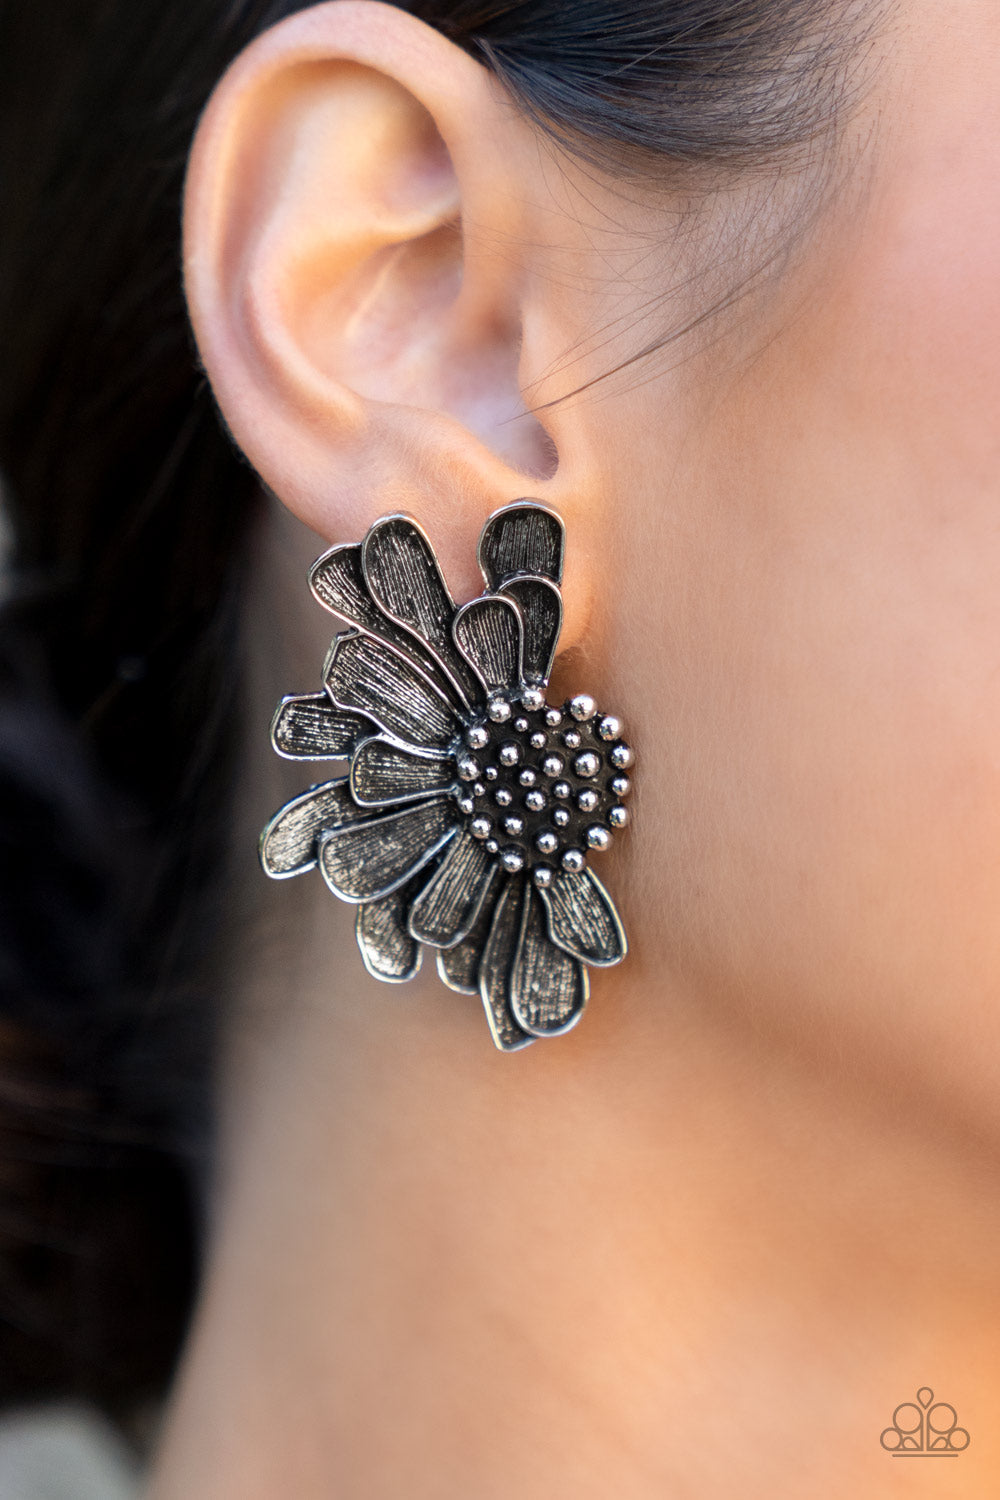 Farmstead Meadow - Silver Petal Earrings - Paparazzi Accessories - Imperfect silver petals bloom from a studded center, layering into a rustic half blossom for a whimsical flair.